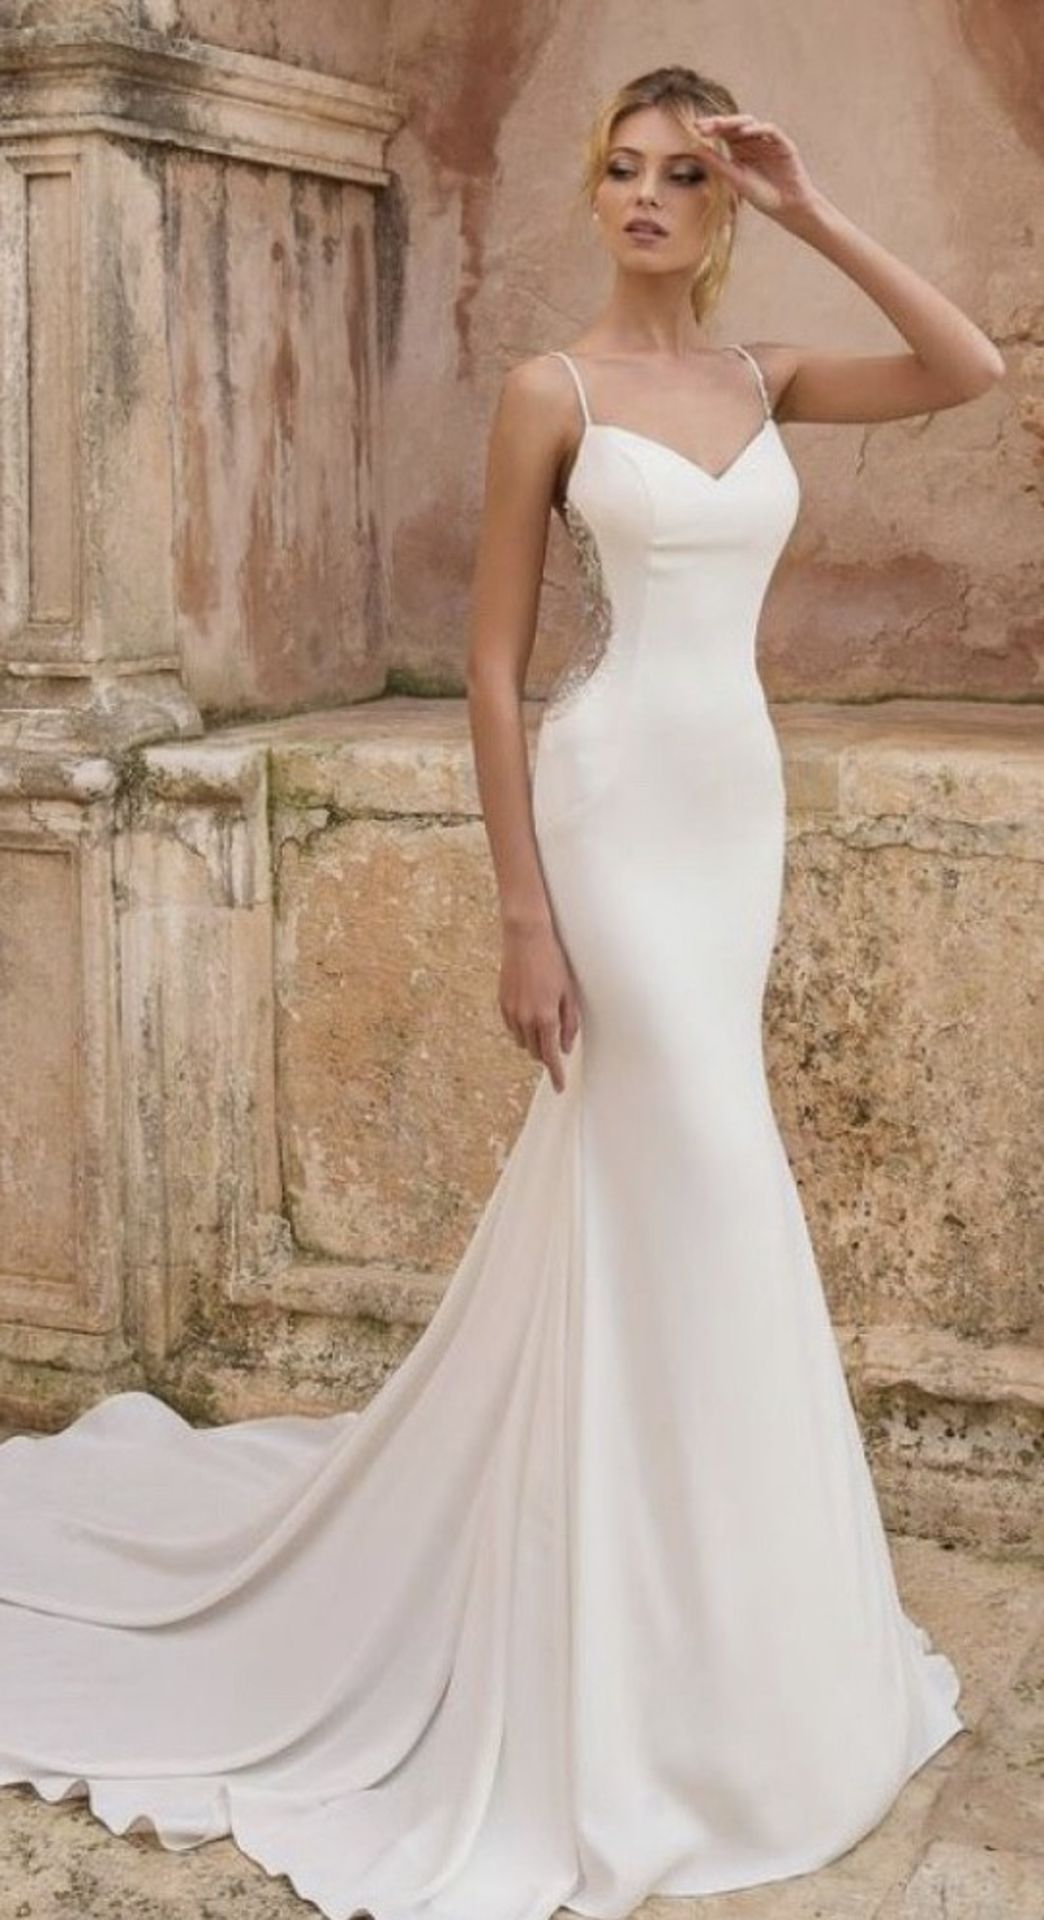 1 x Justin Alexander Fit & Flare Wedding Dress With Illusion Cutout Sides - Size 12 - RRP £1,180